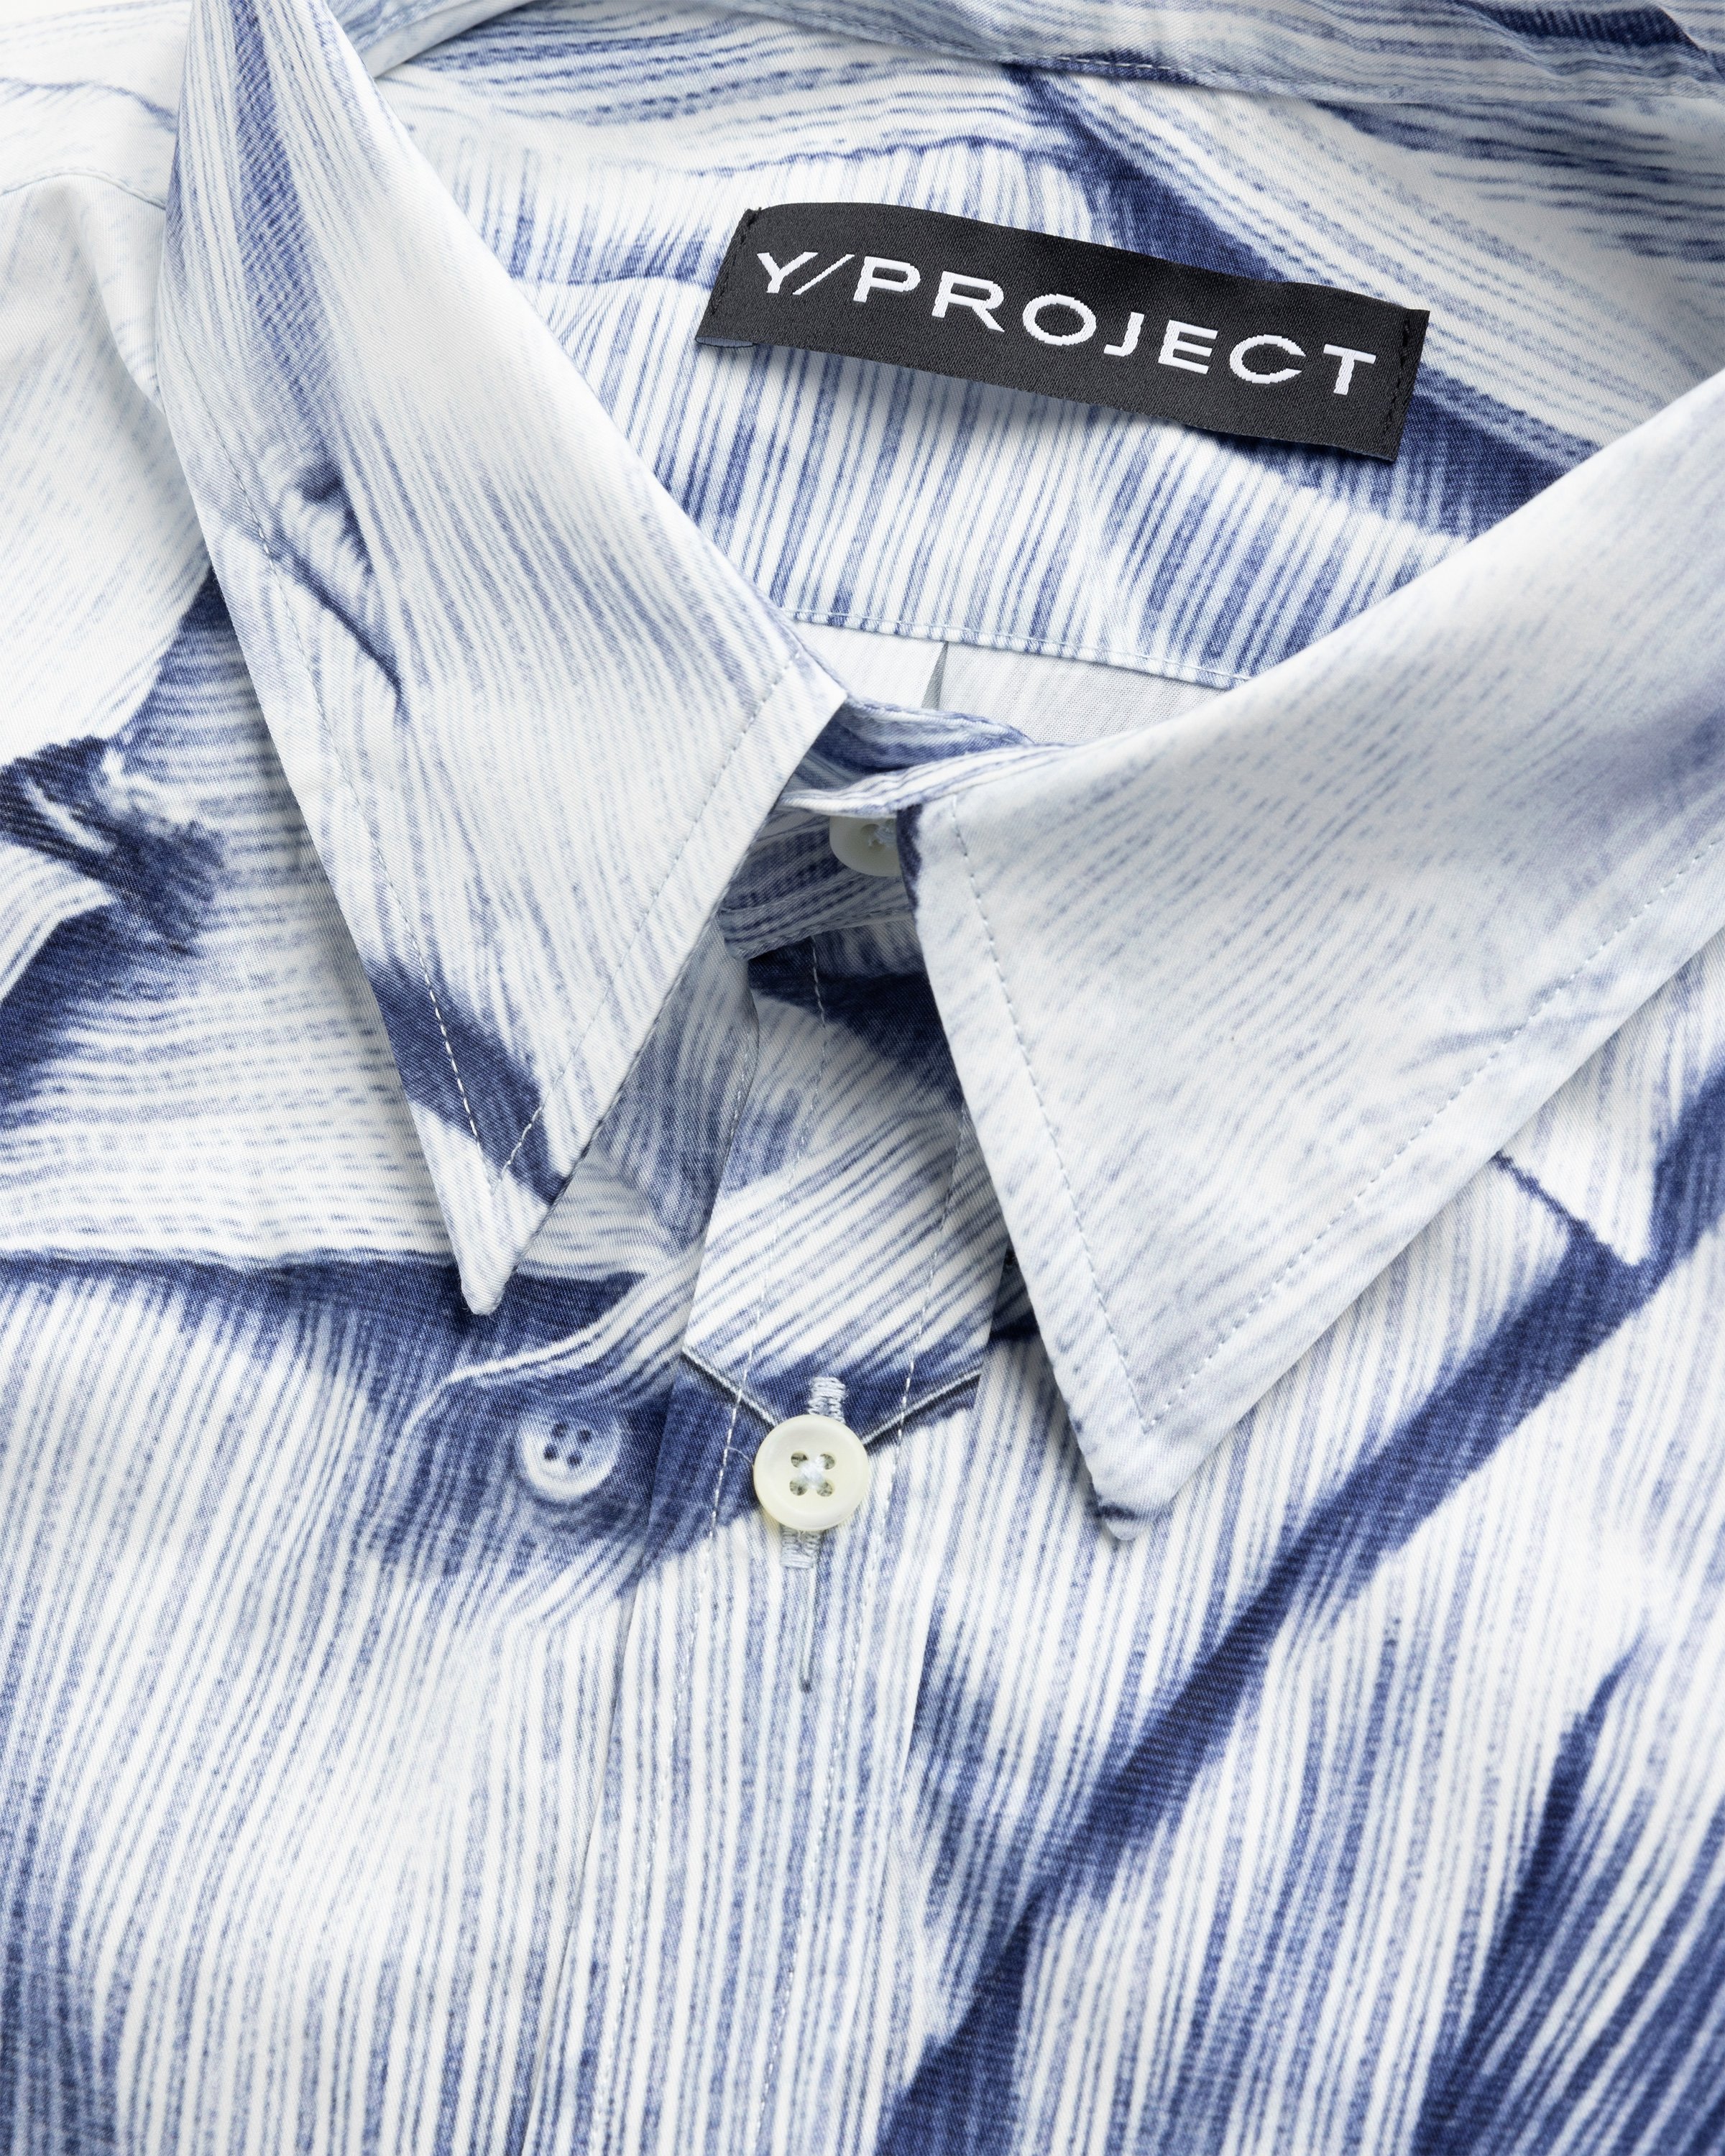 Y/Project - COMPACT PRINT SHIRT - Clothing - Blue - Image 6